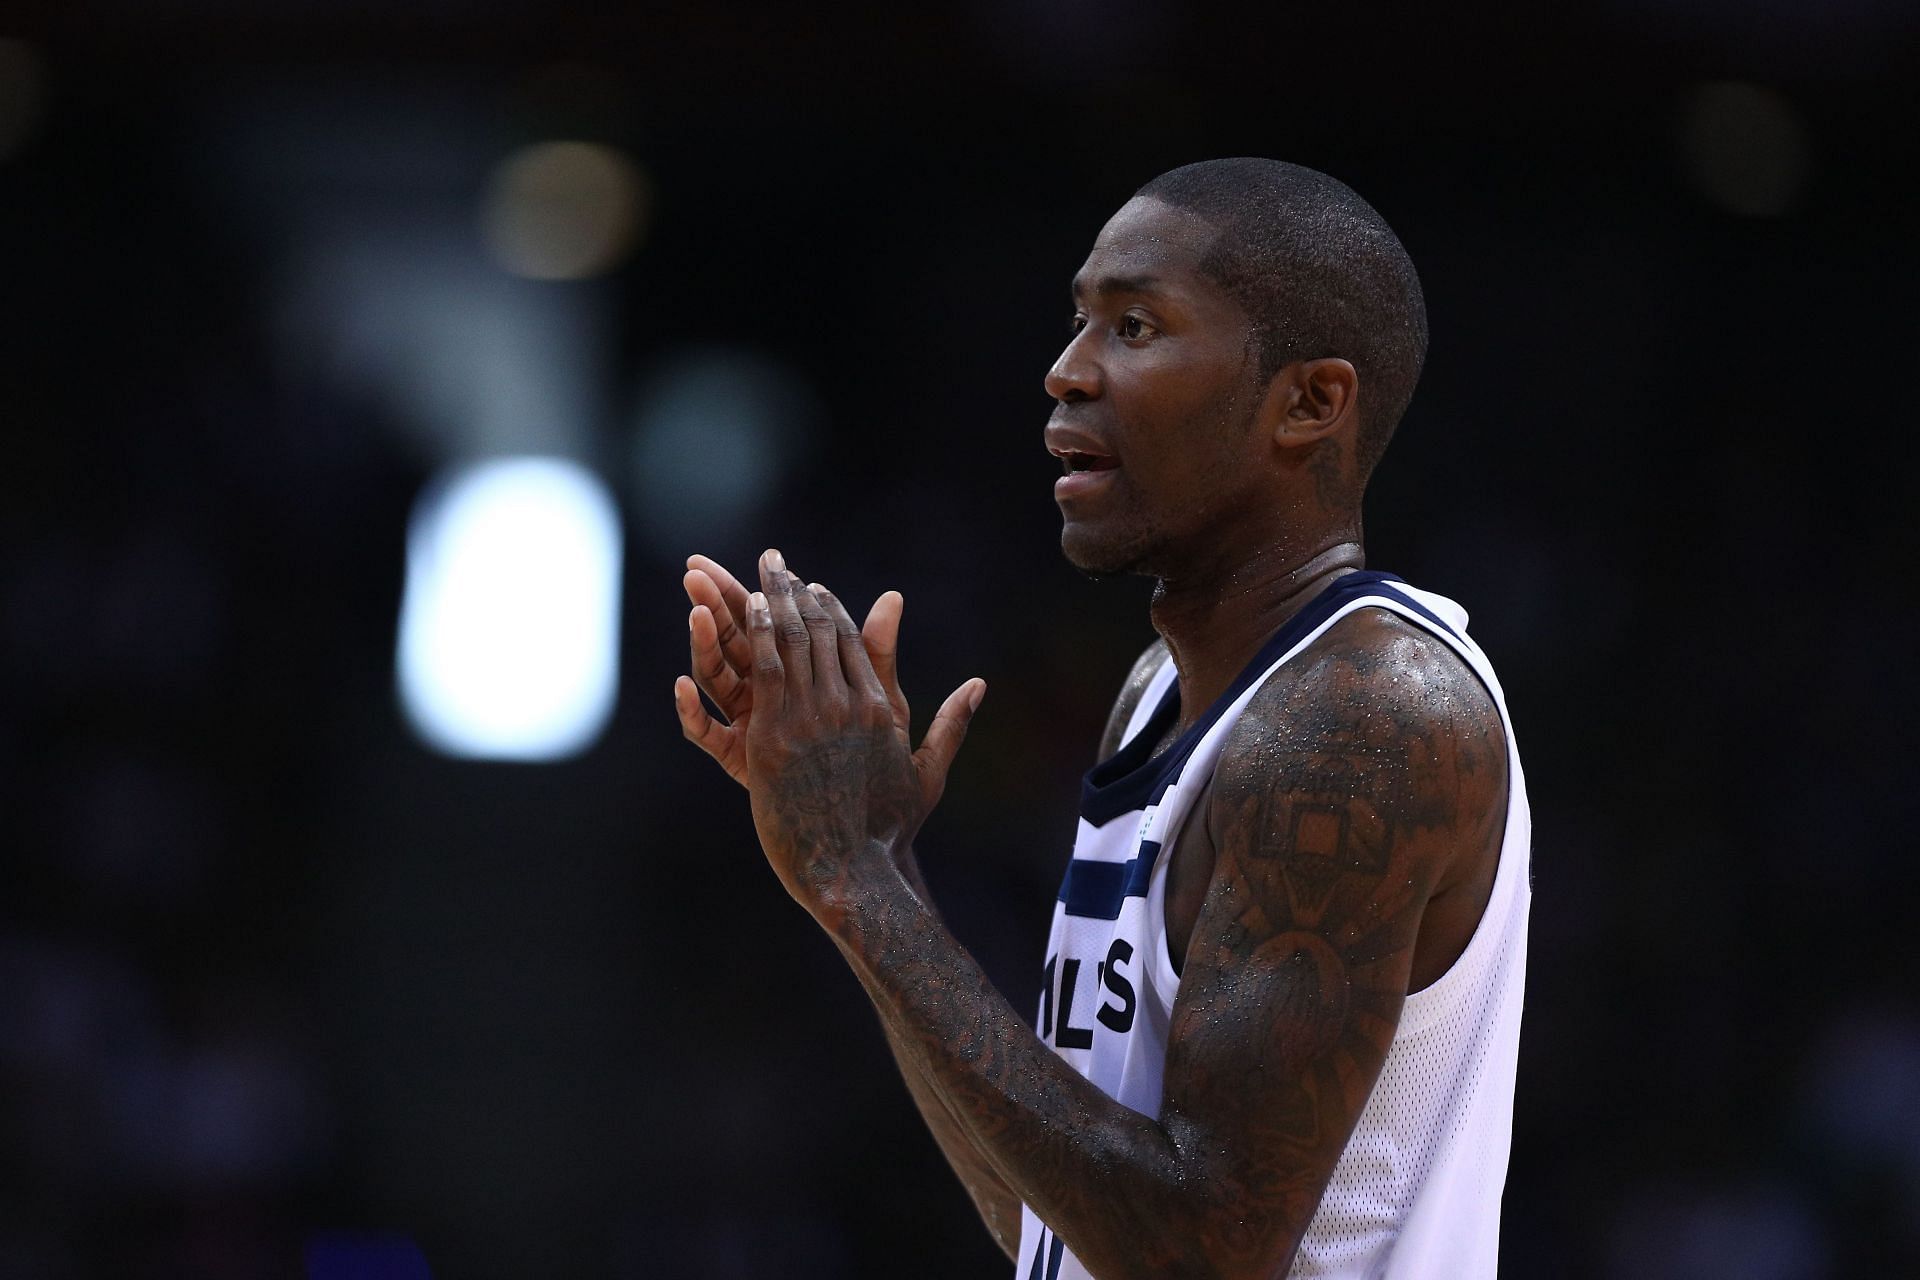 Jamal Crawford during his stint with the Minnesota Timberwolves